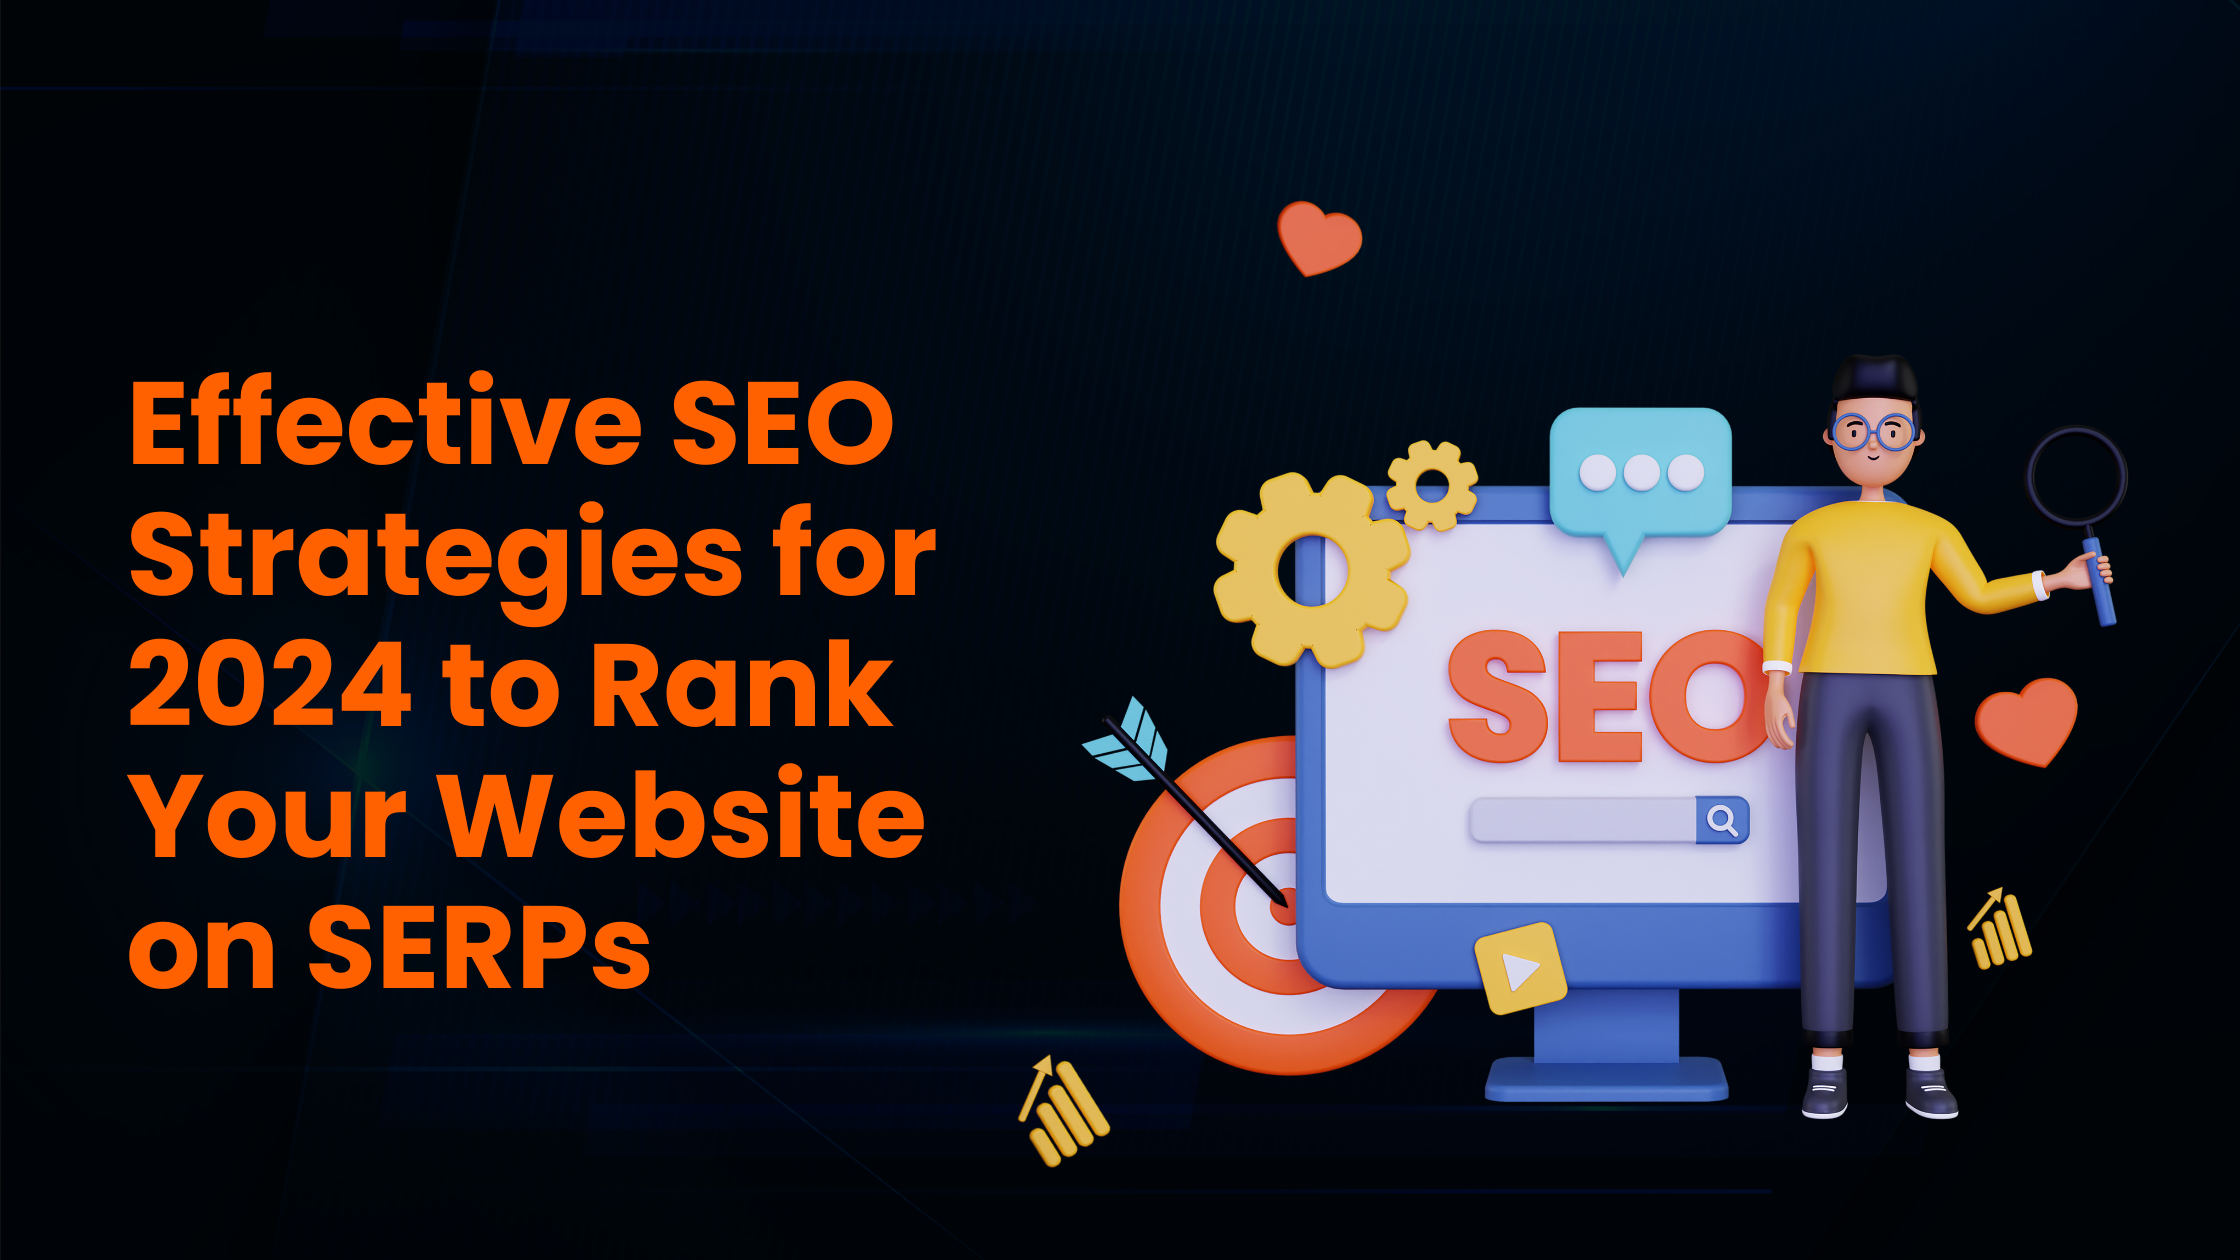 Effective SEO Strategies for 2024 to Rank Your Website on SERPs